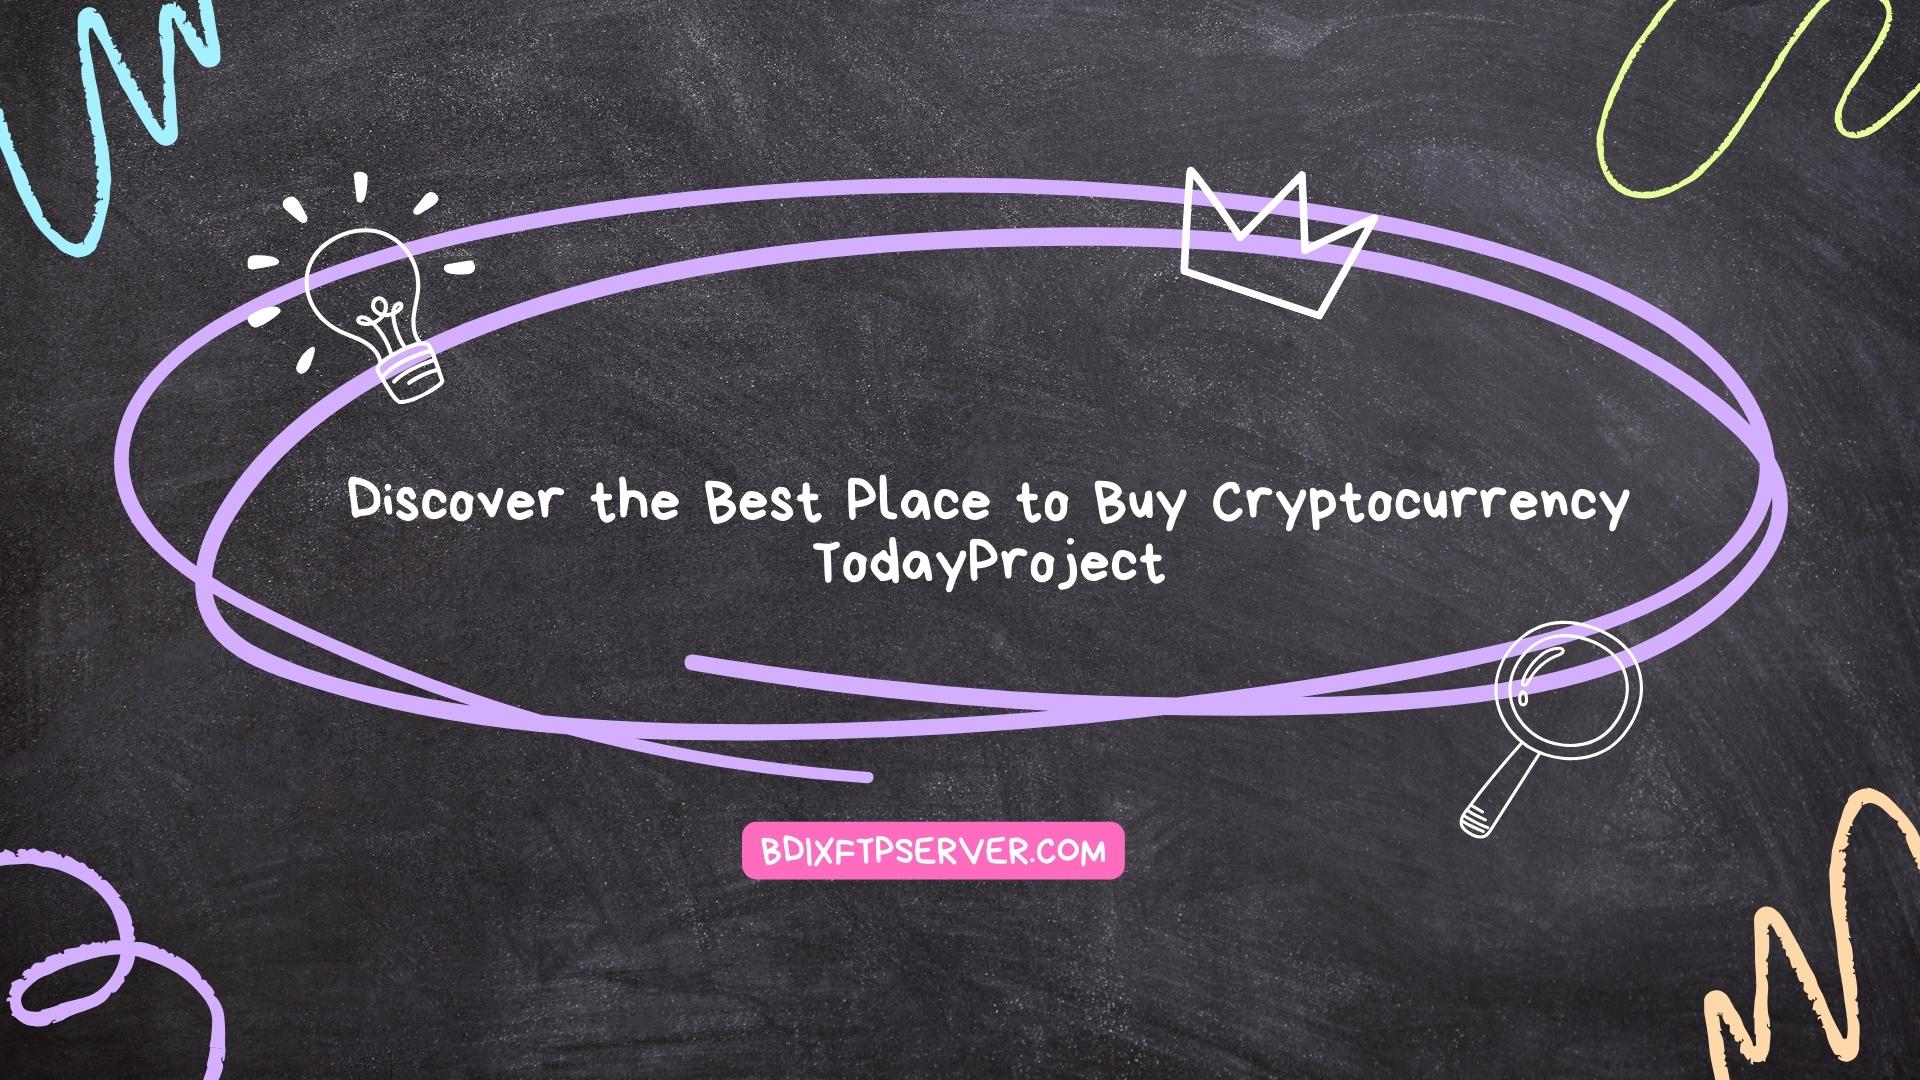 Discover the Best Place to Buy Cryptocurrency Today